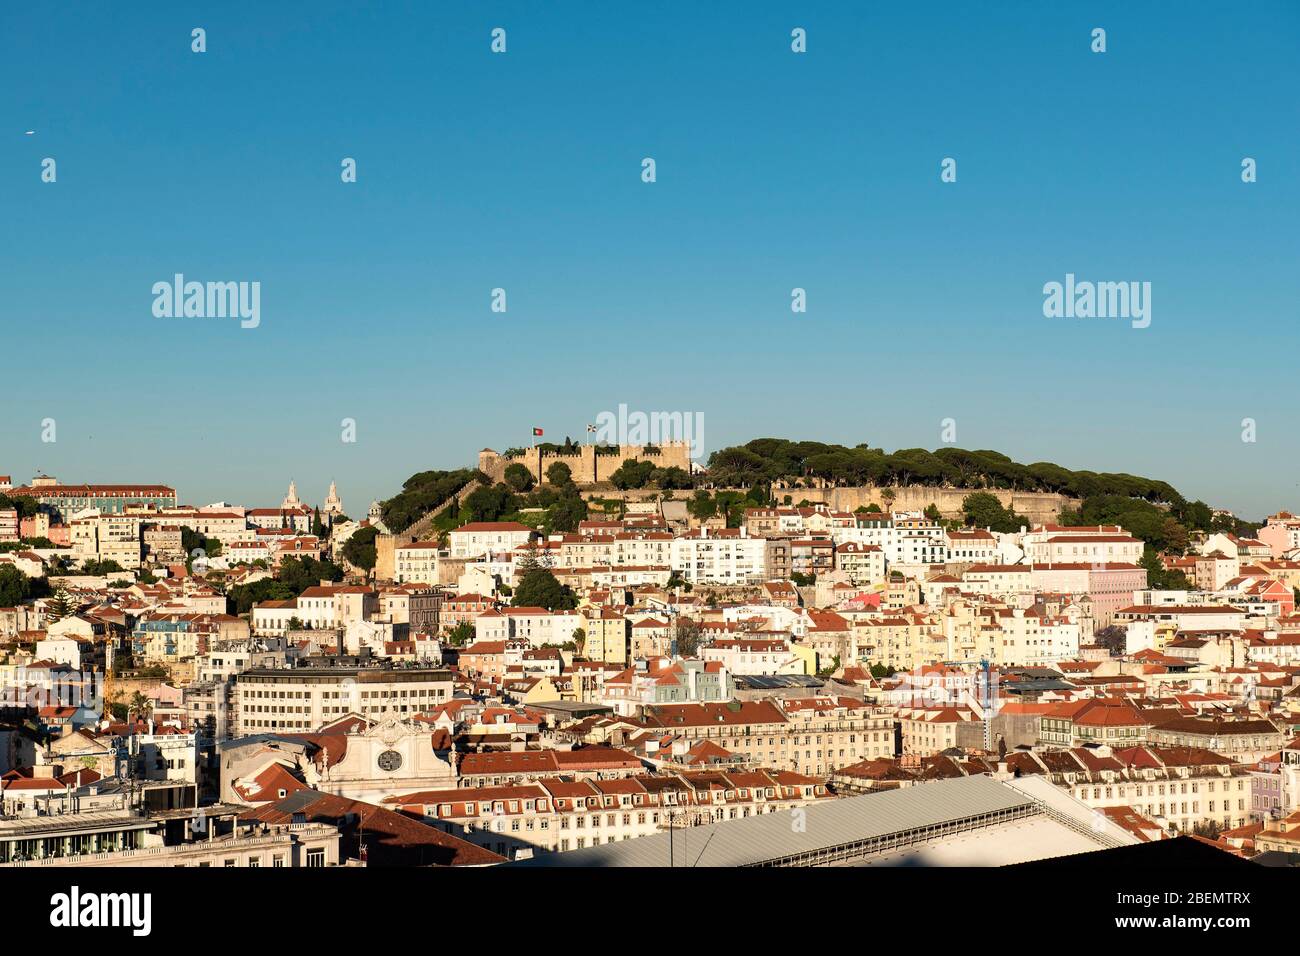 Lisbon, capital of Portugal. Panorama of the city, which is spread over various hills with the castle in the distance, with a blue sky. Stock Photo